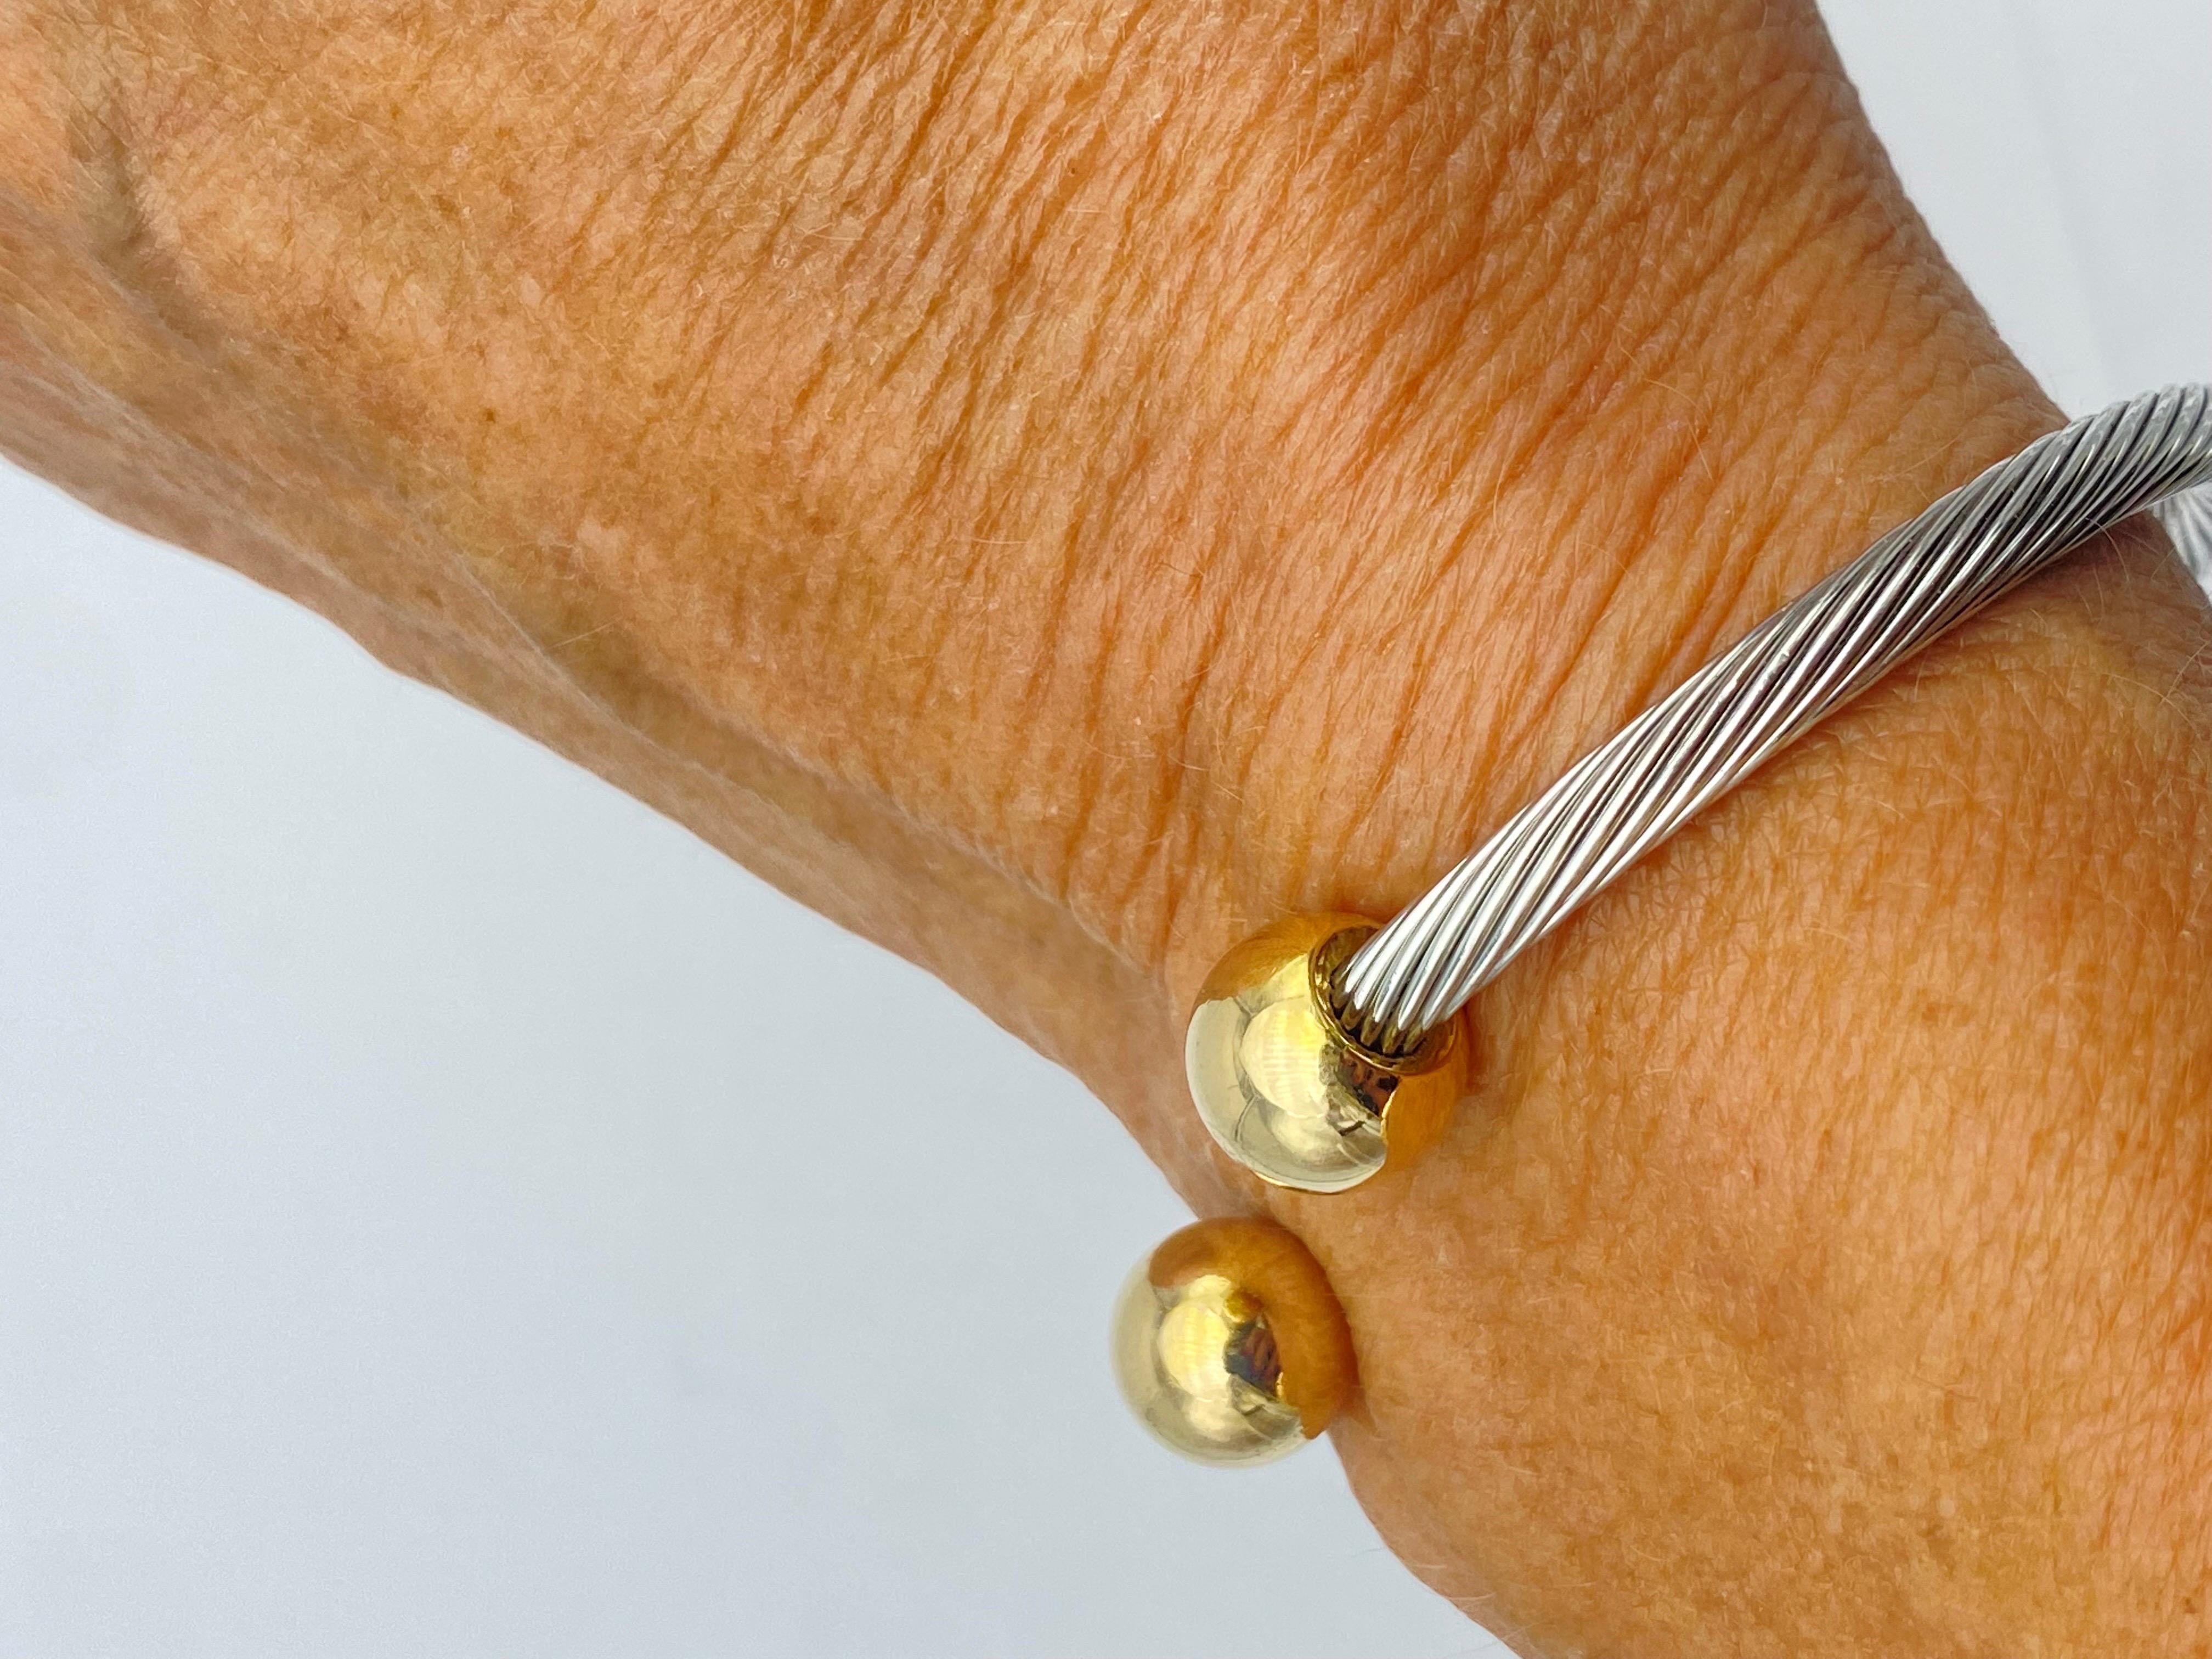 This well know style is a great piece to add to your wrist with other bracelets or to wear alone.  The jumbo balls are made of 14 karat yellow gold, and since the wire is flexible will accommodate any wrist size.

14 karat yellow gold, 10.50 mm ball